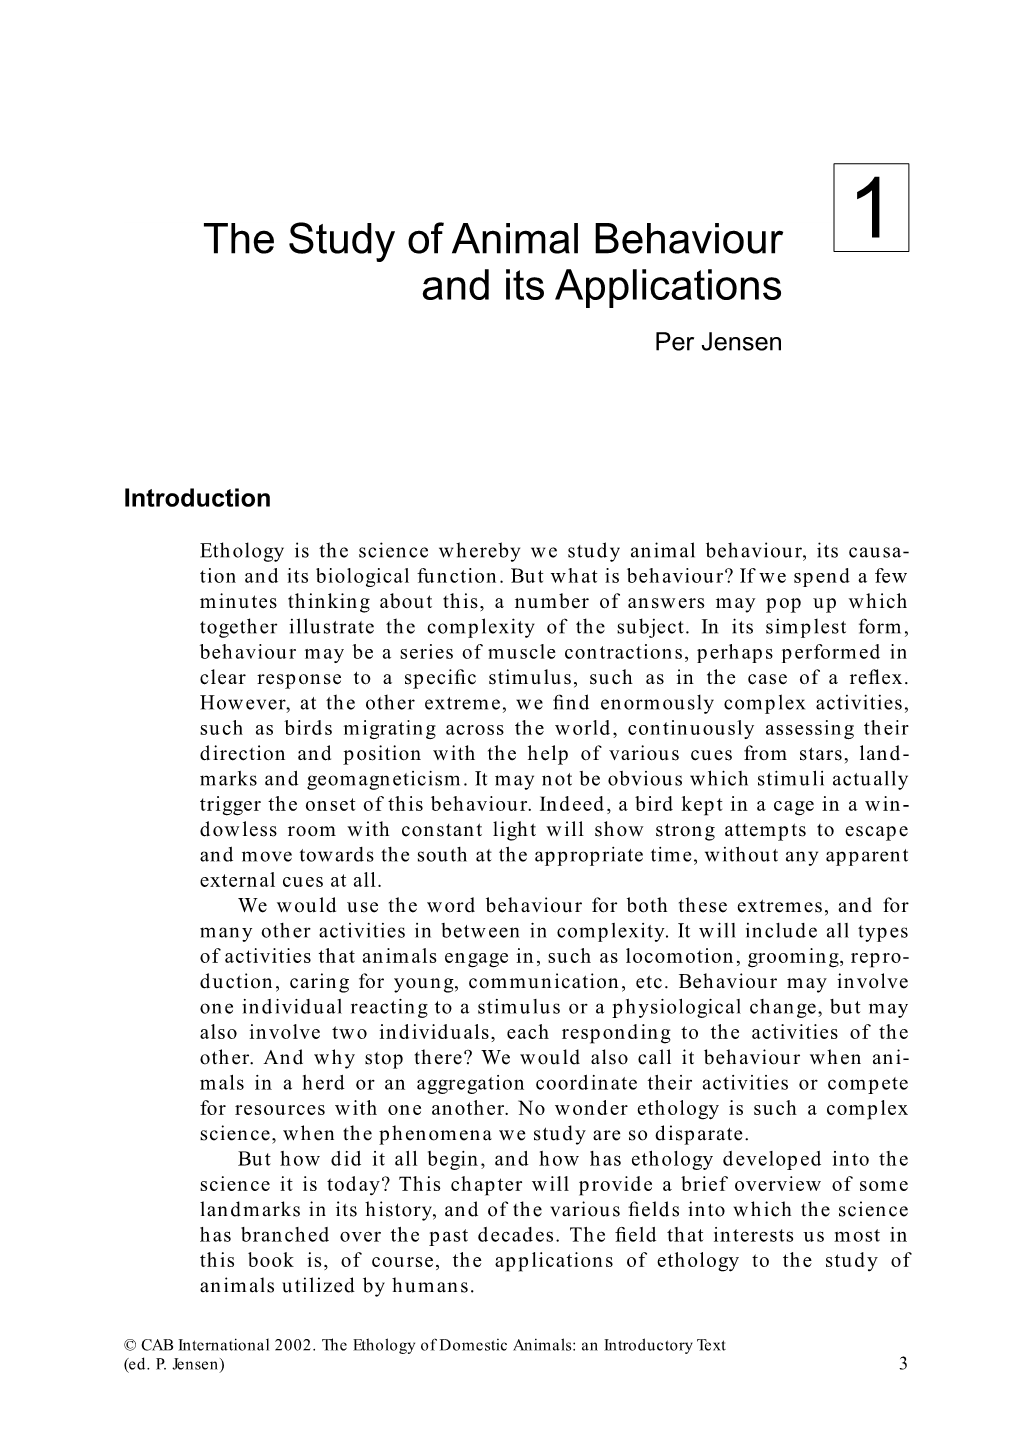 The Study of Animal Behaviour and Its Applications